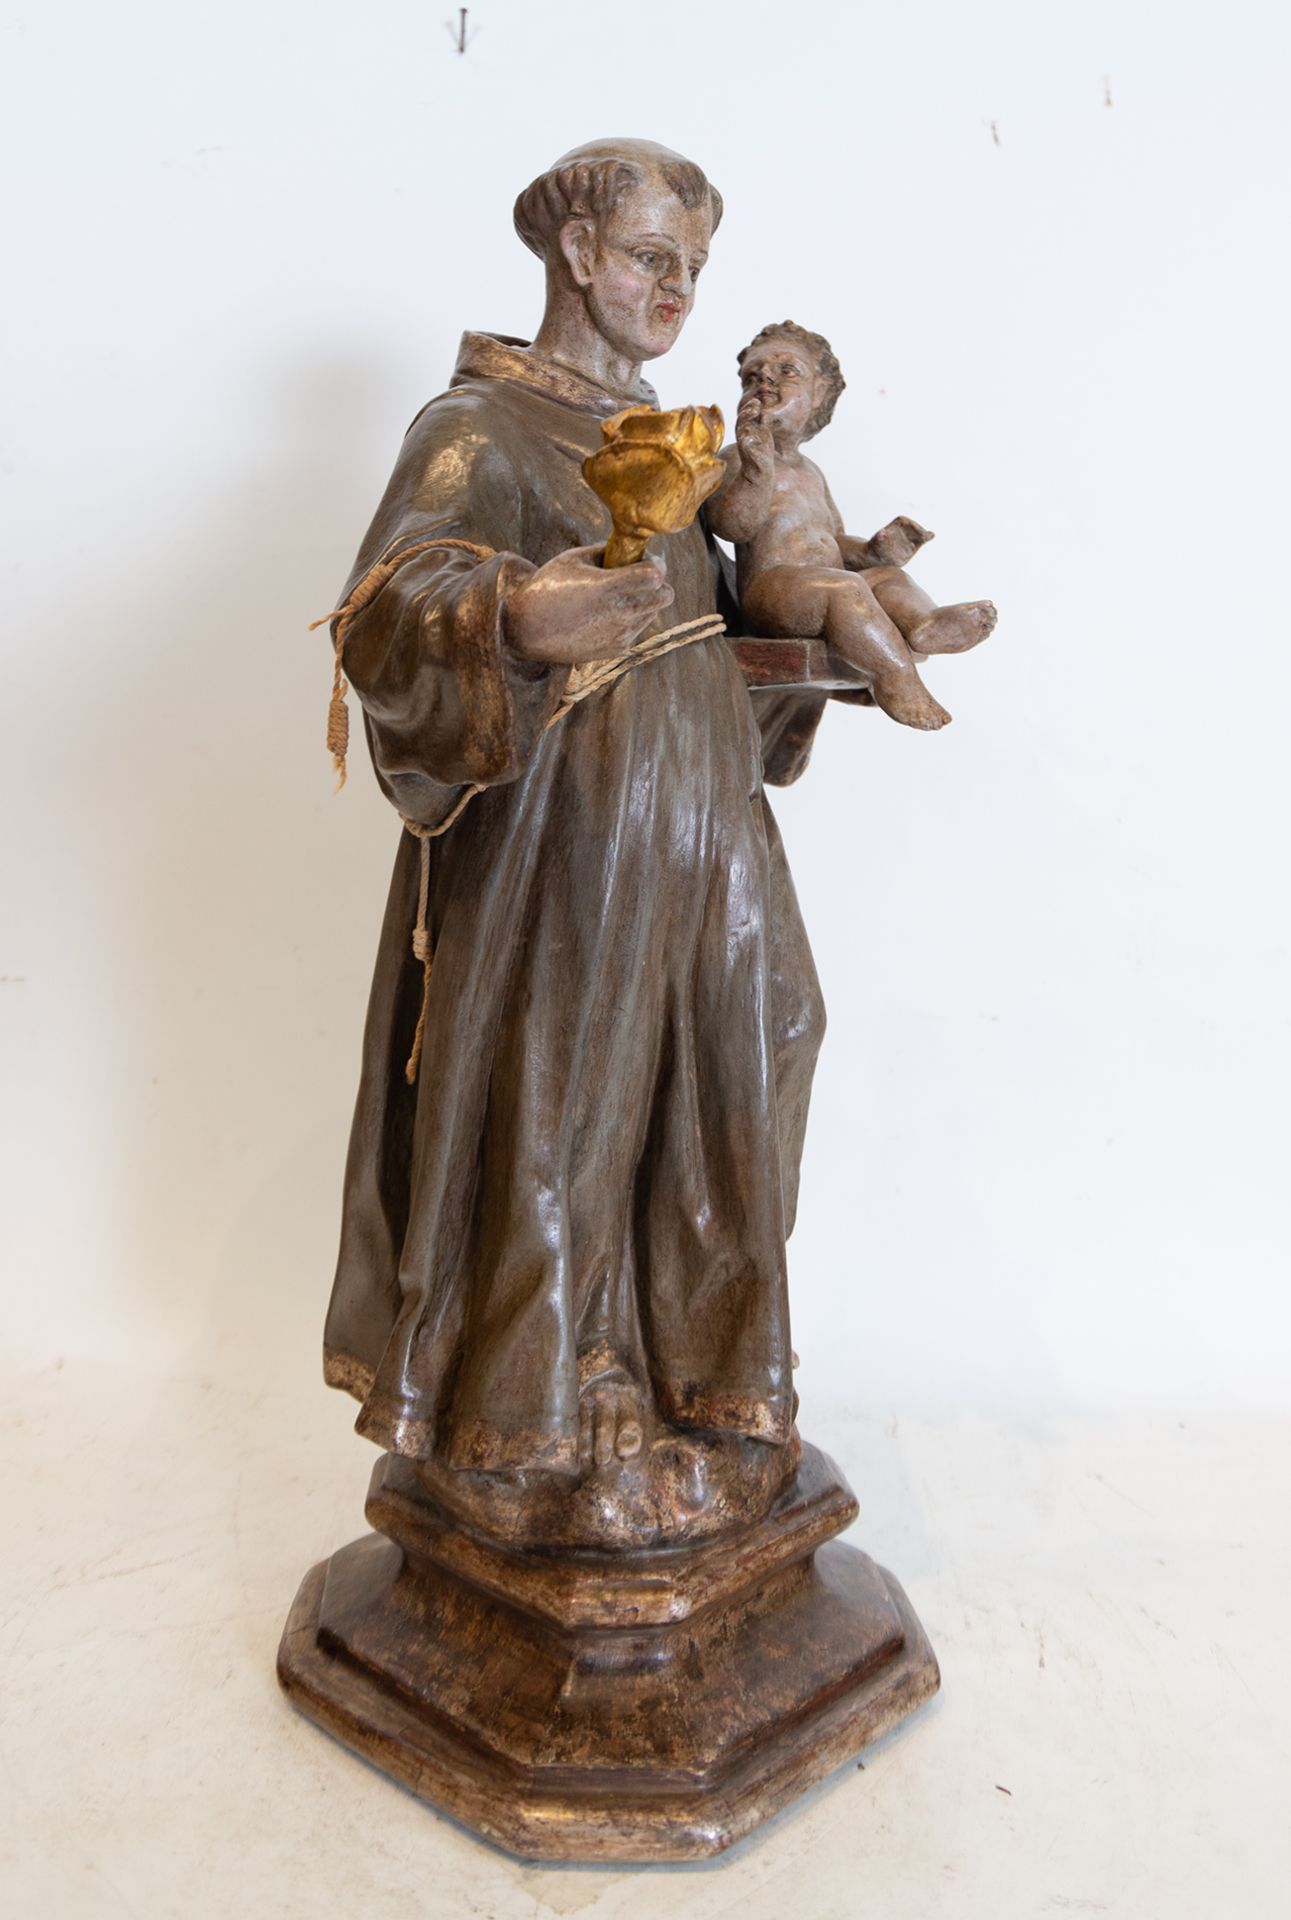 Saint Anthony with the Child in Arms, 18th century Granada school - Image 3 of 4